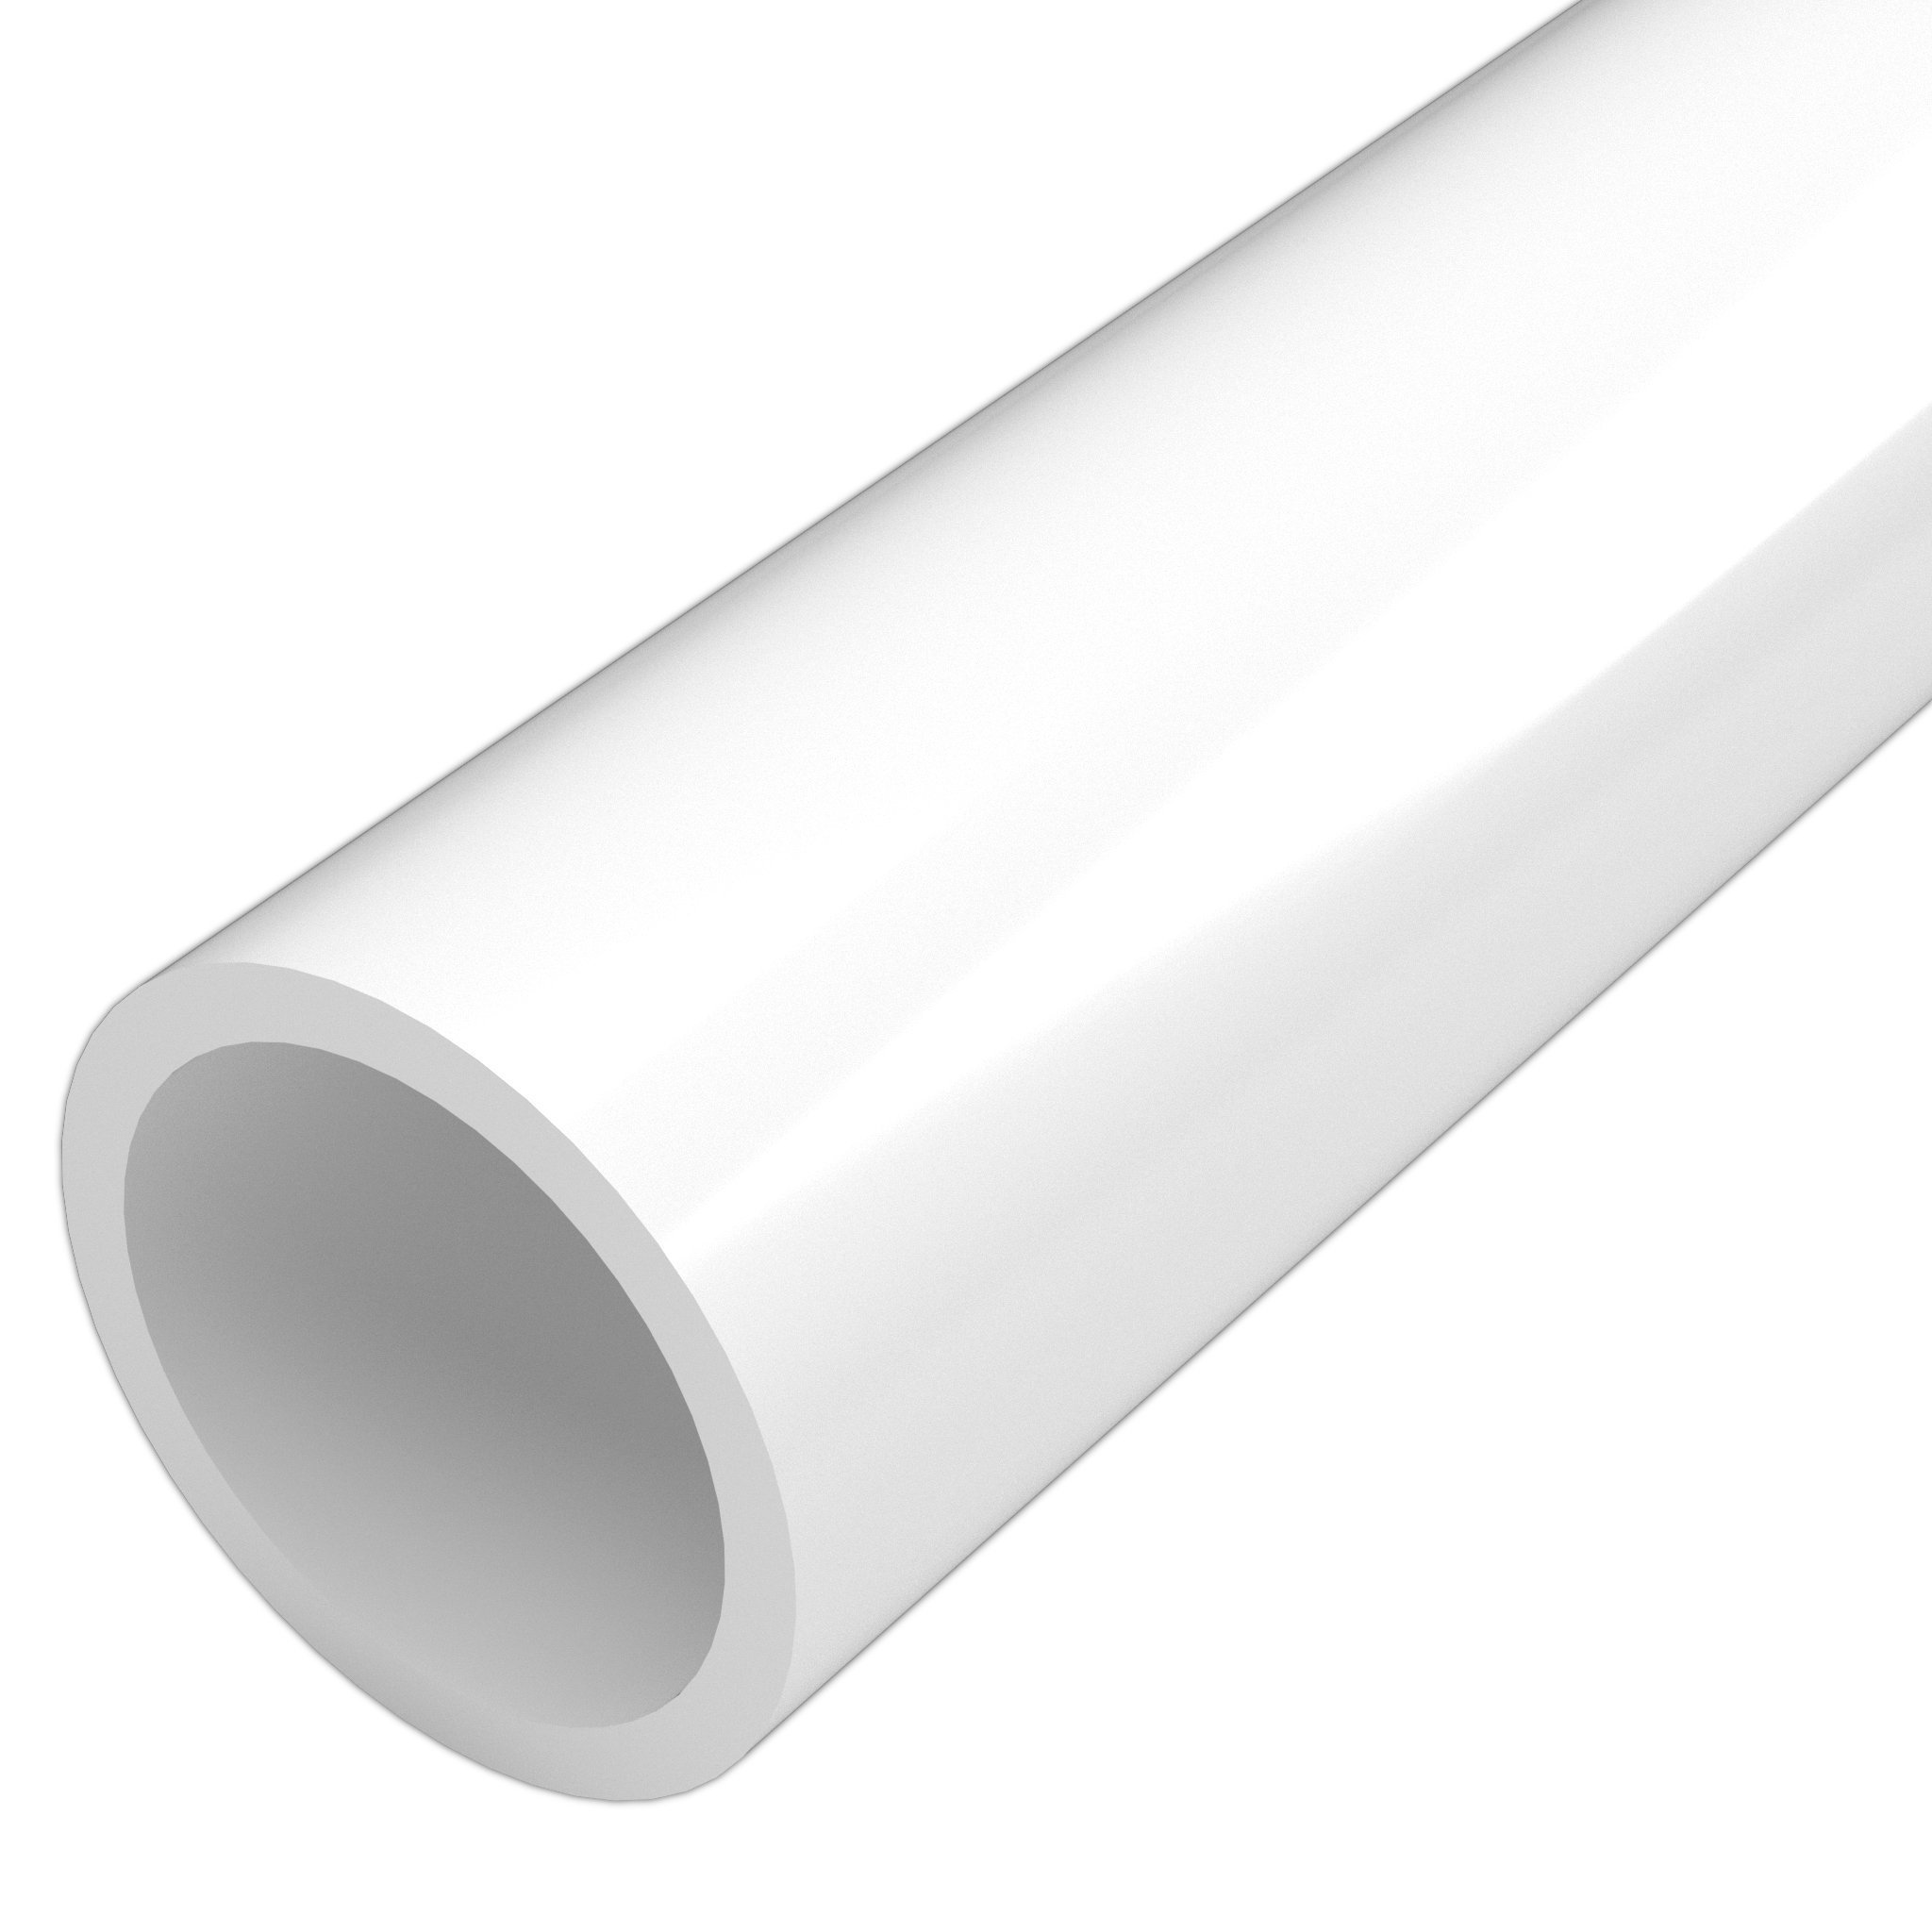 Pipe 12"X20' PVC DWV Foam Core Plain End Do Not Use for Pressure Applications